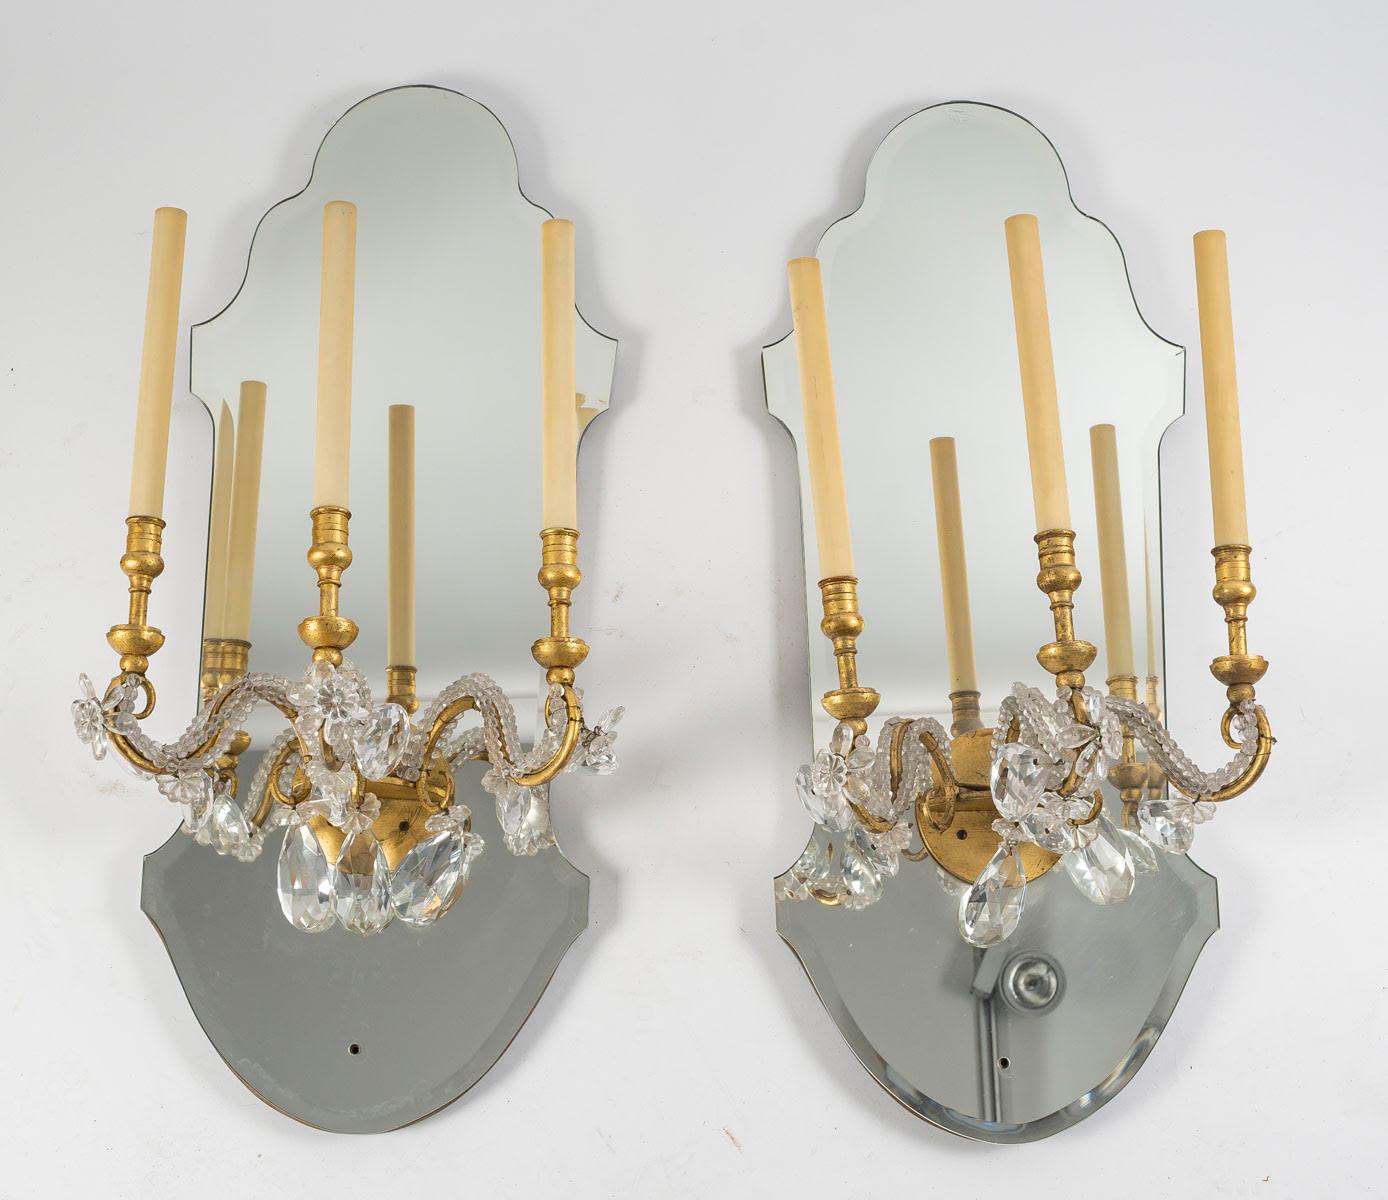 Mid-Century Modern Suite of 6 Gilded Iron and Mirror Sconces with Glass Drops, 1950-1960. For Sale